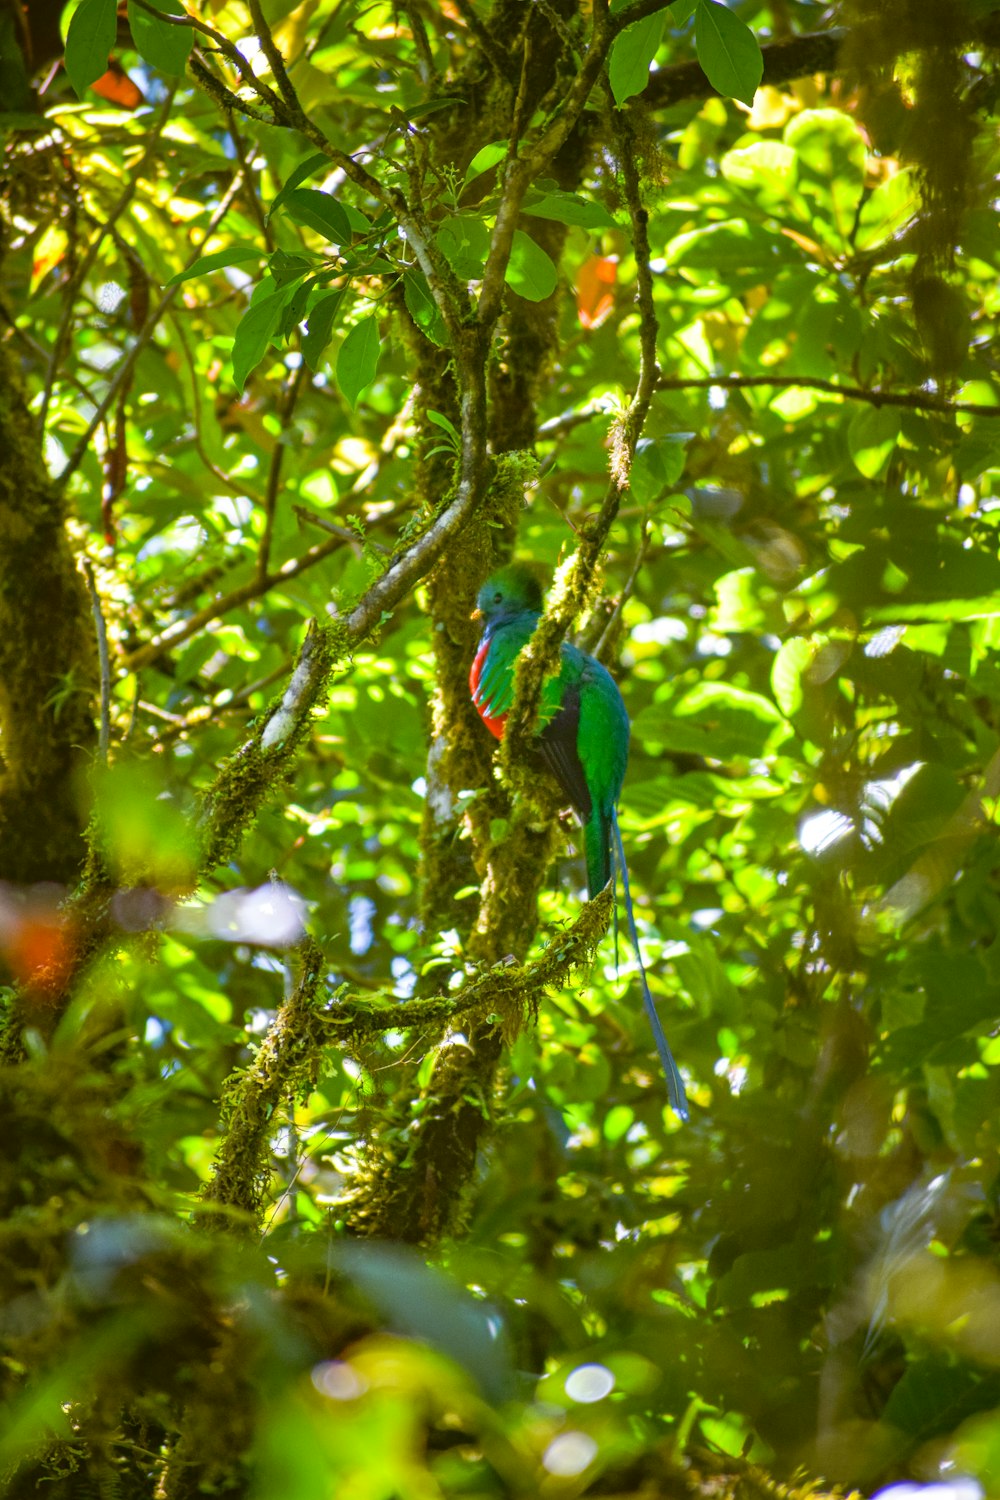 a colorful bird sitting on a branch in a tree